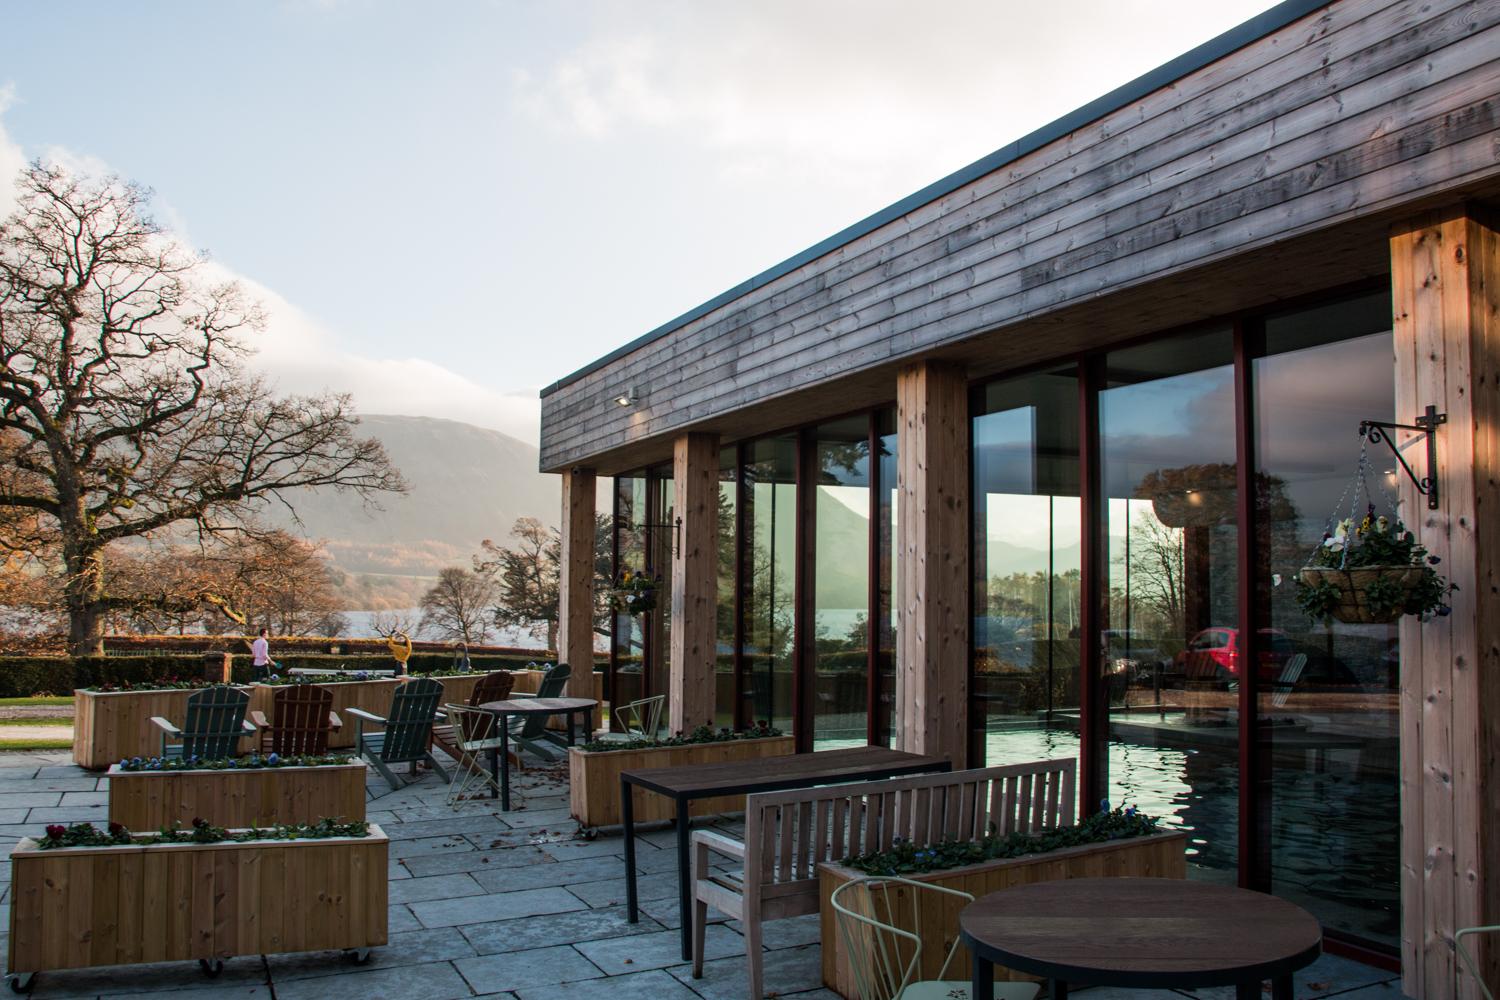 Places to Stay: Another Place, The Lake, Cumbria